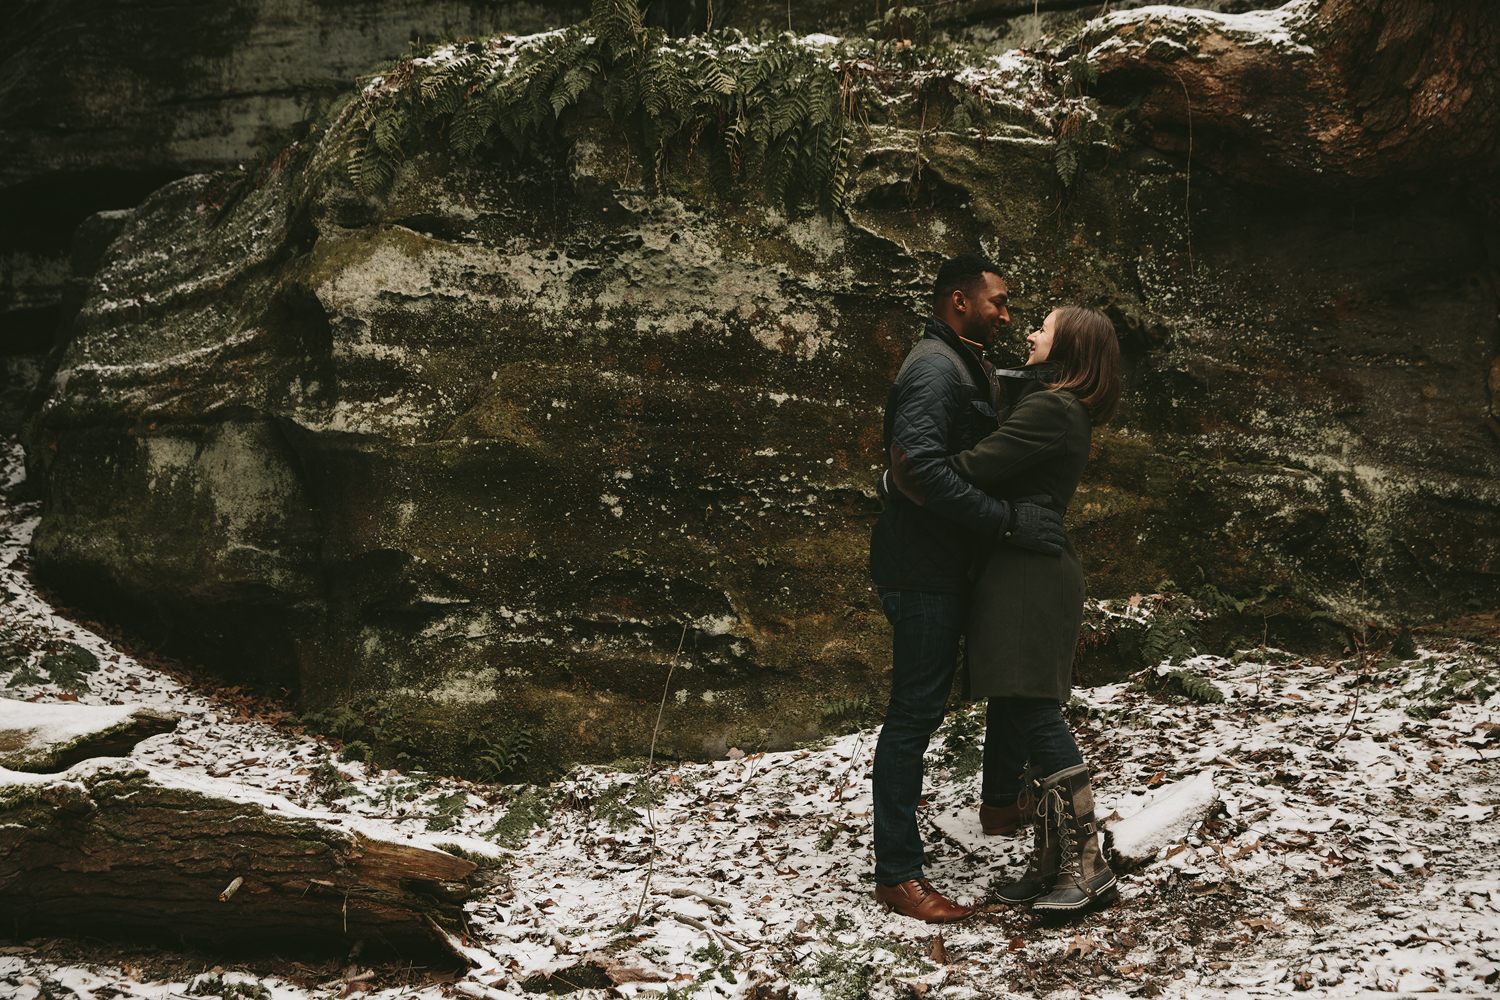 cuyahoga-valley-national-park-engagement-photography-9.jpg